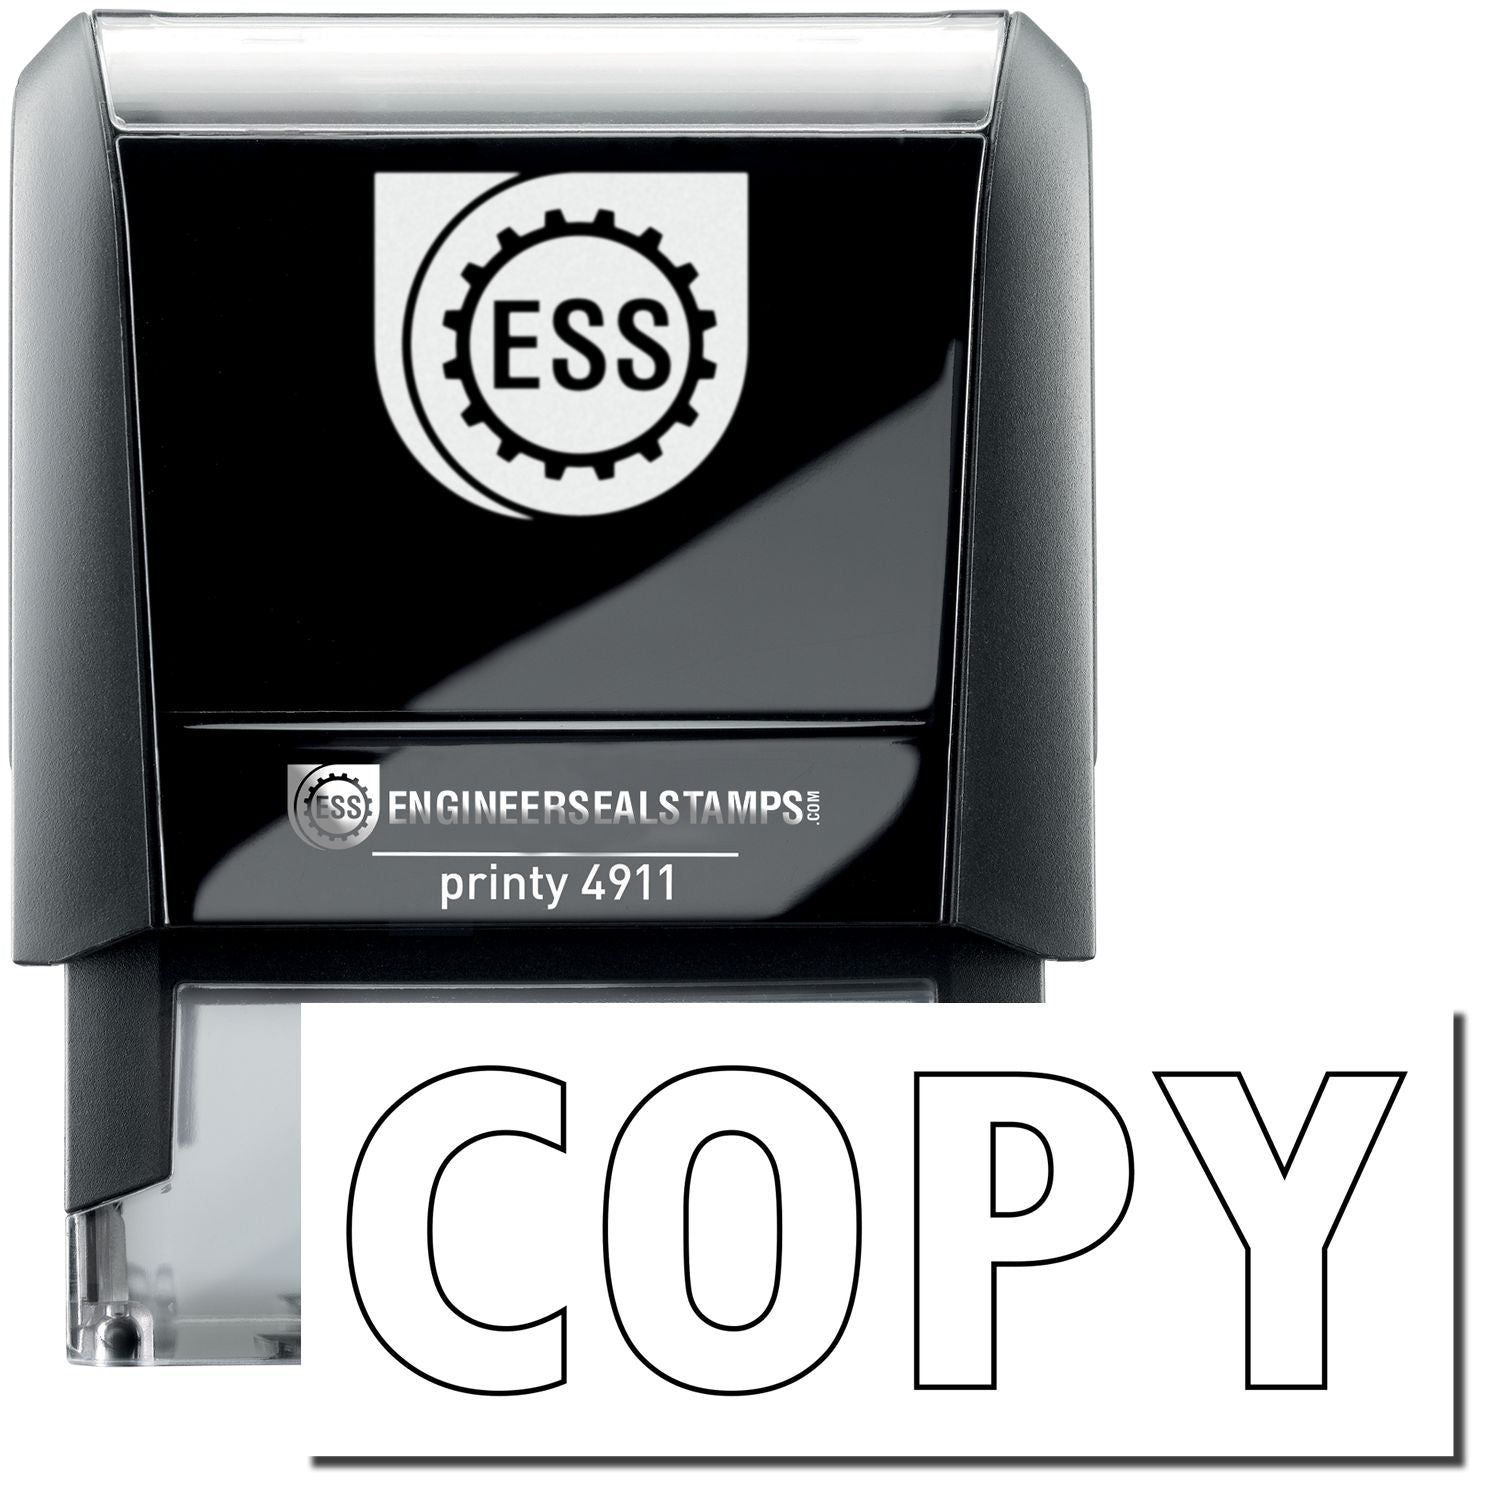 A self-inking stamp with a stamped image showing how the text "COPY" in an outline style is displayed after stamping.